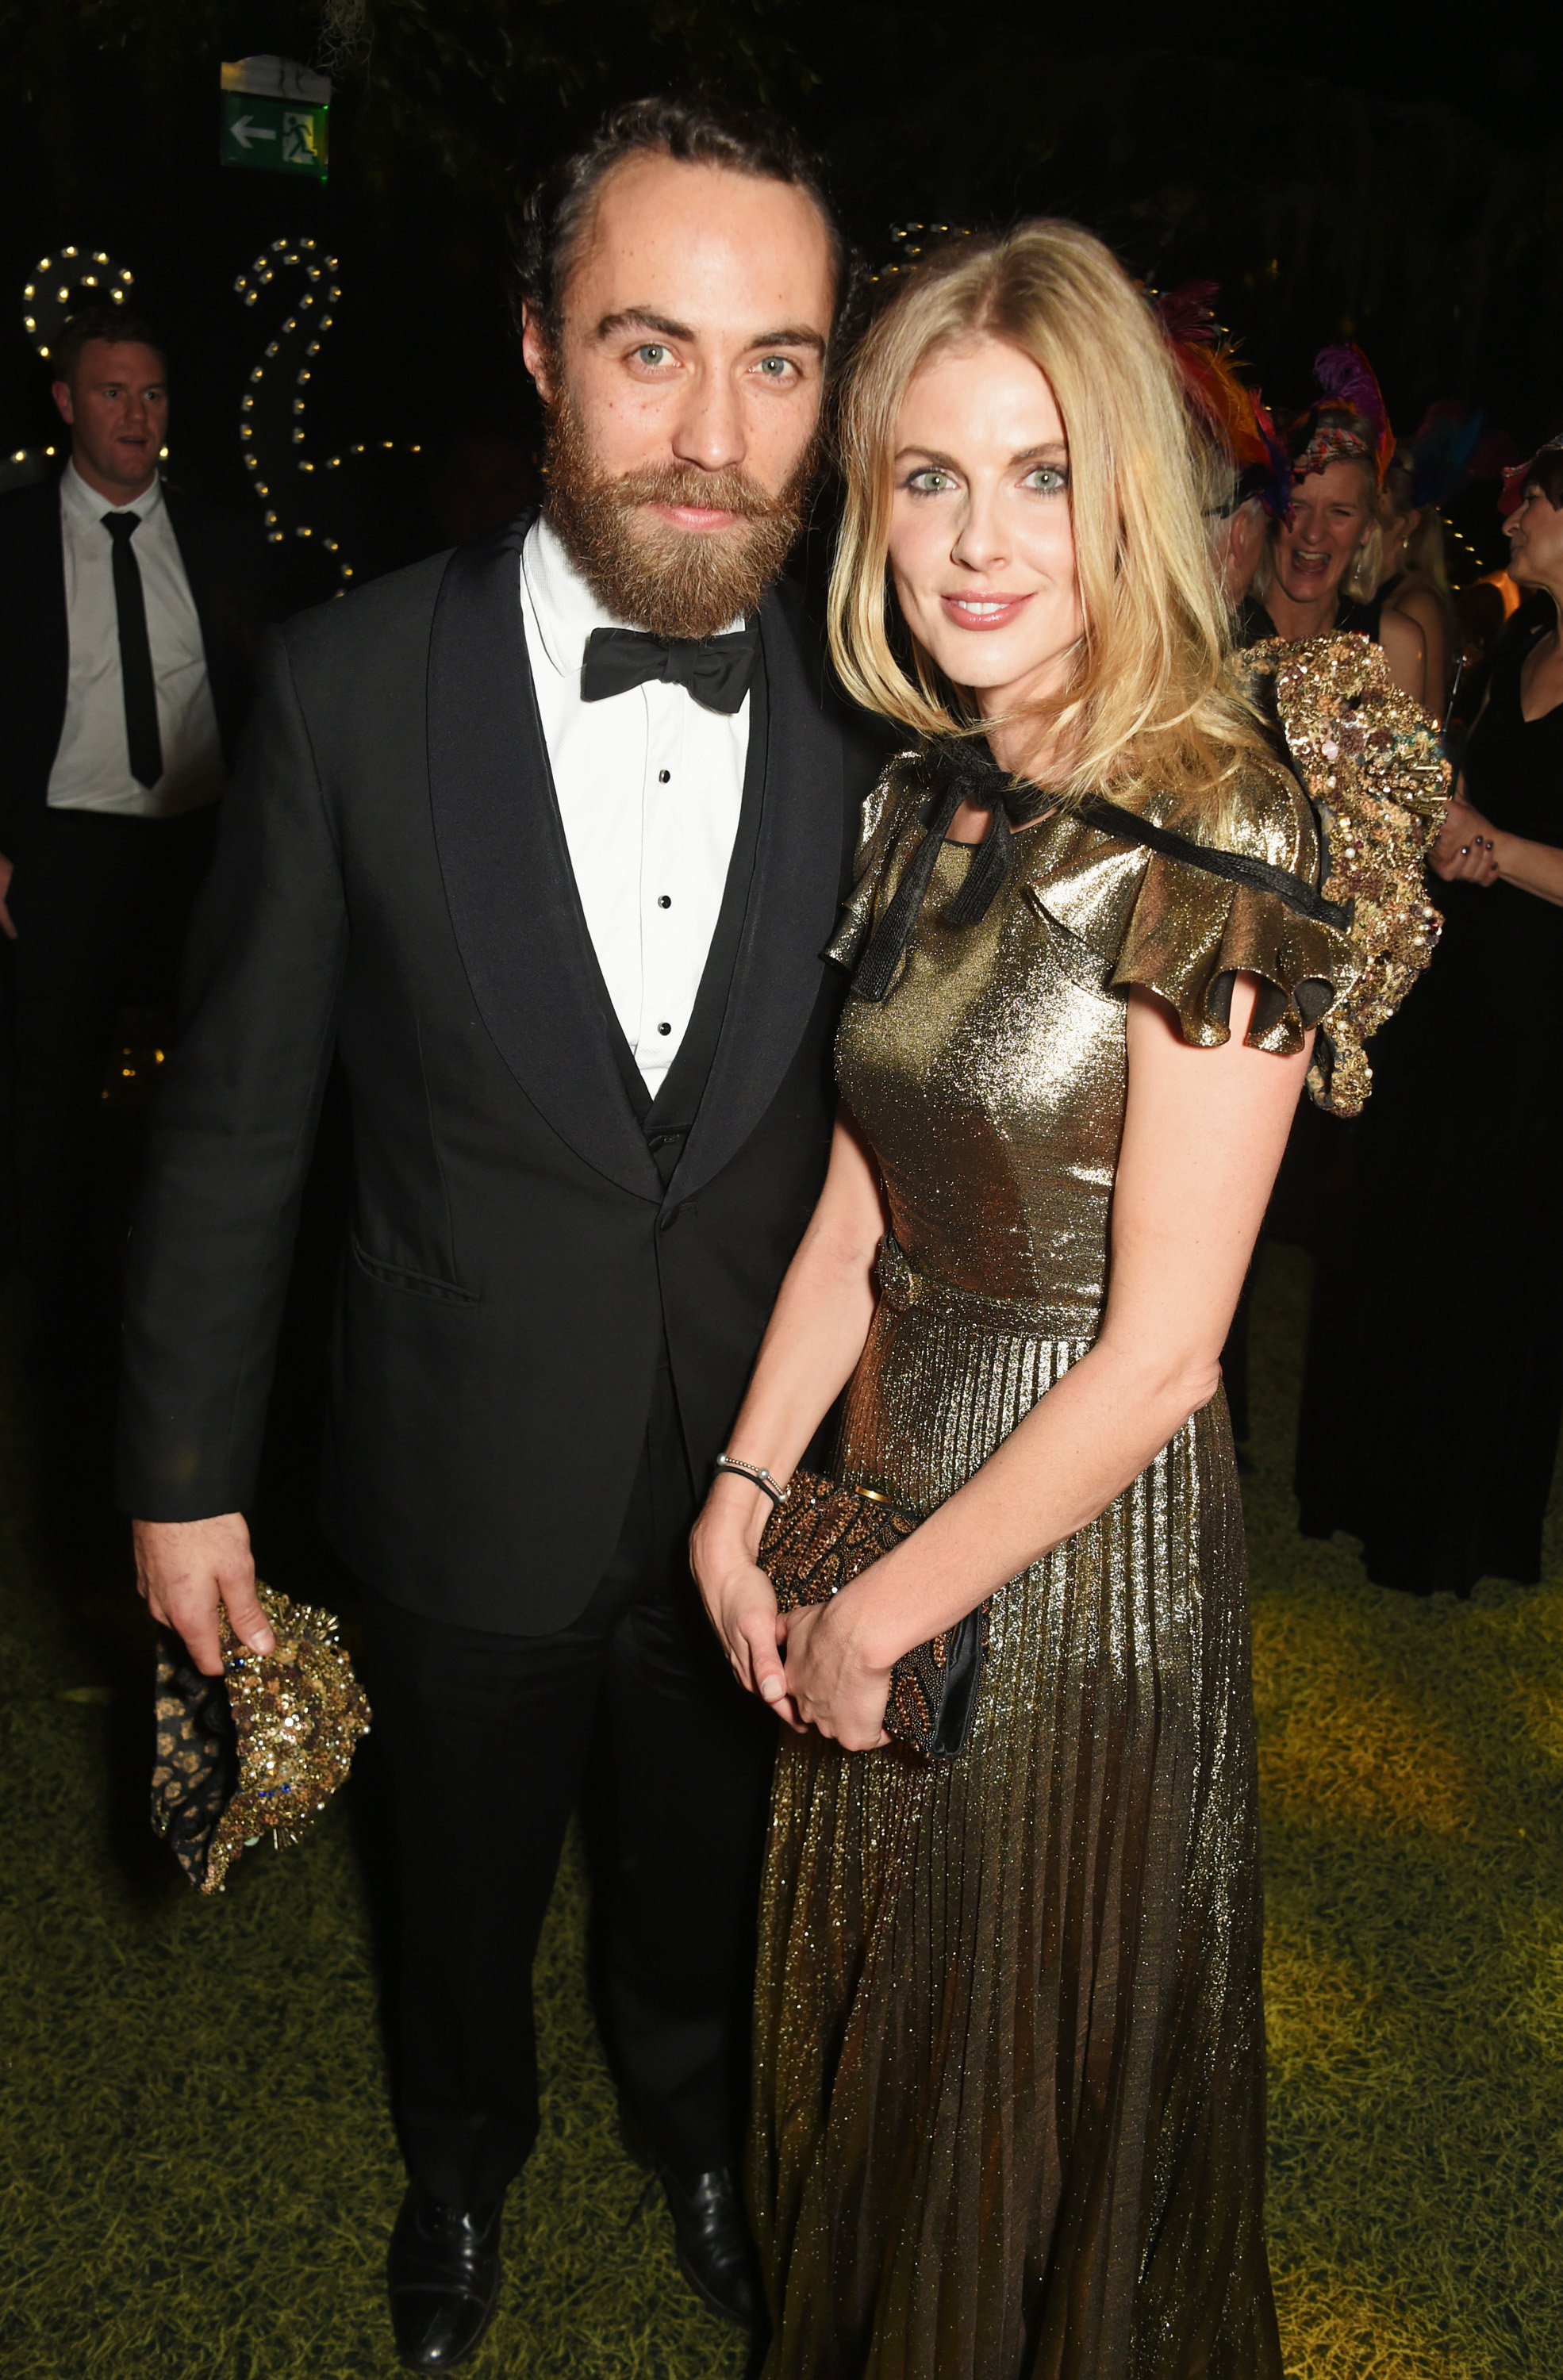 James Middleton and Donna Air attend The Animal Ball 2016 on November 22, 2016, in London, England. | Source: Getty Images.